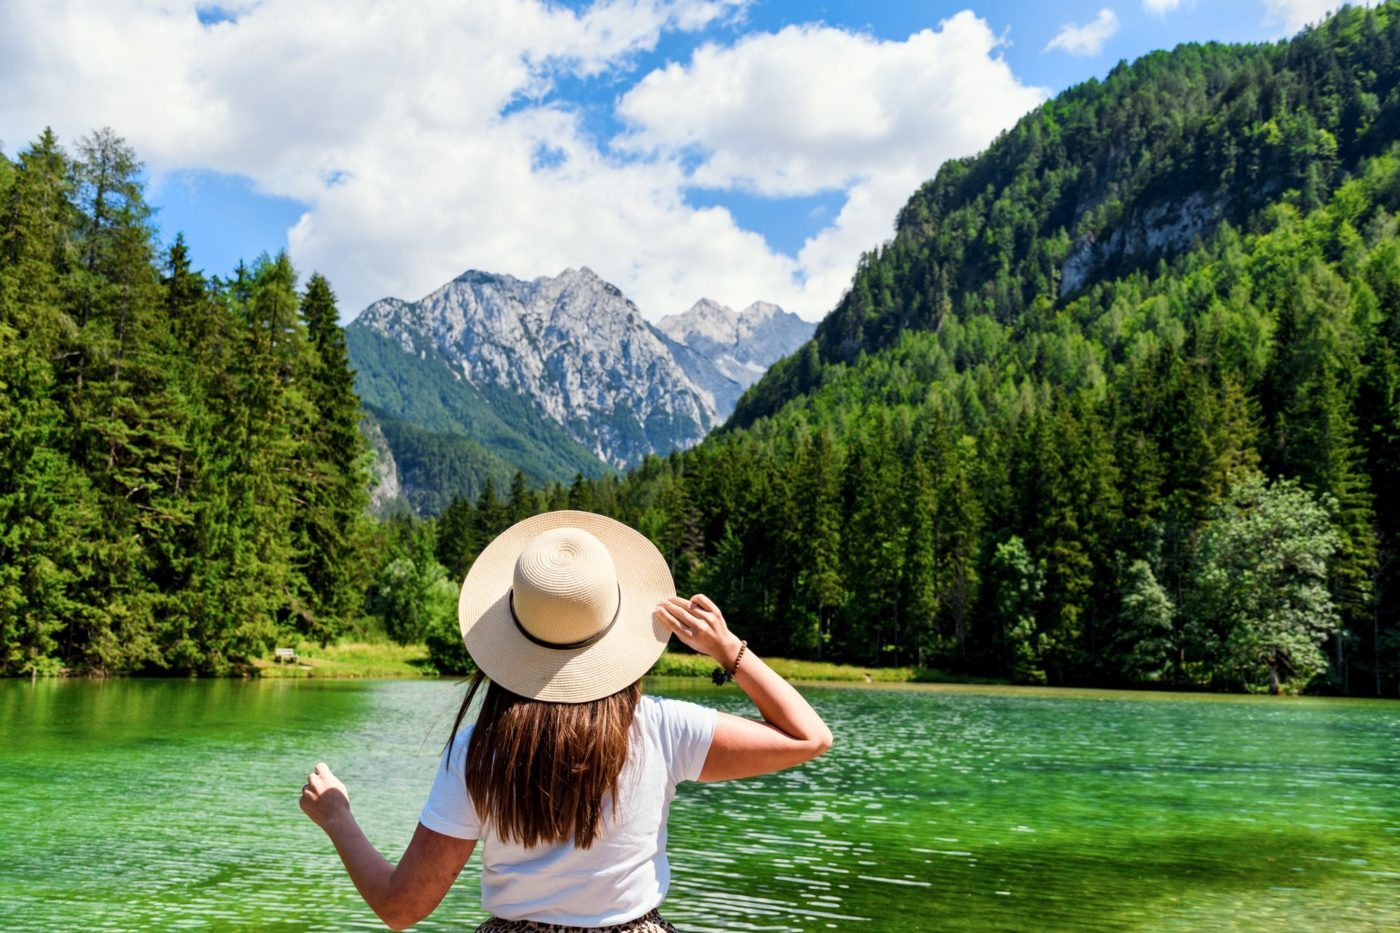 Rear view of woman standing by idyllic lake in mountains.